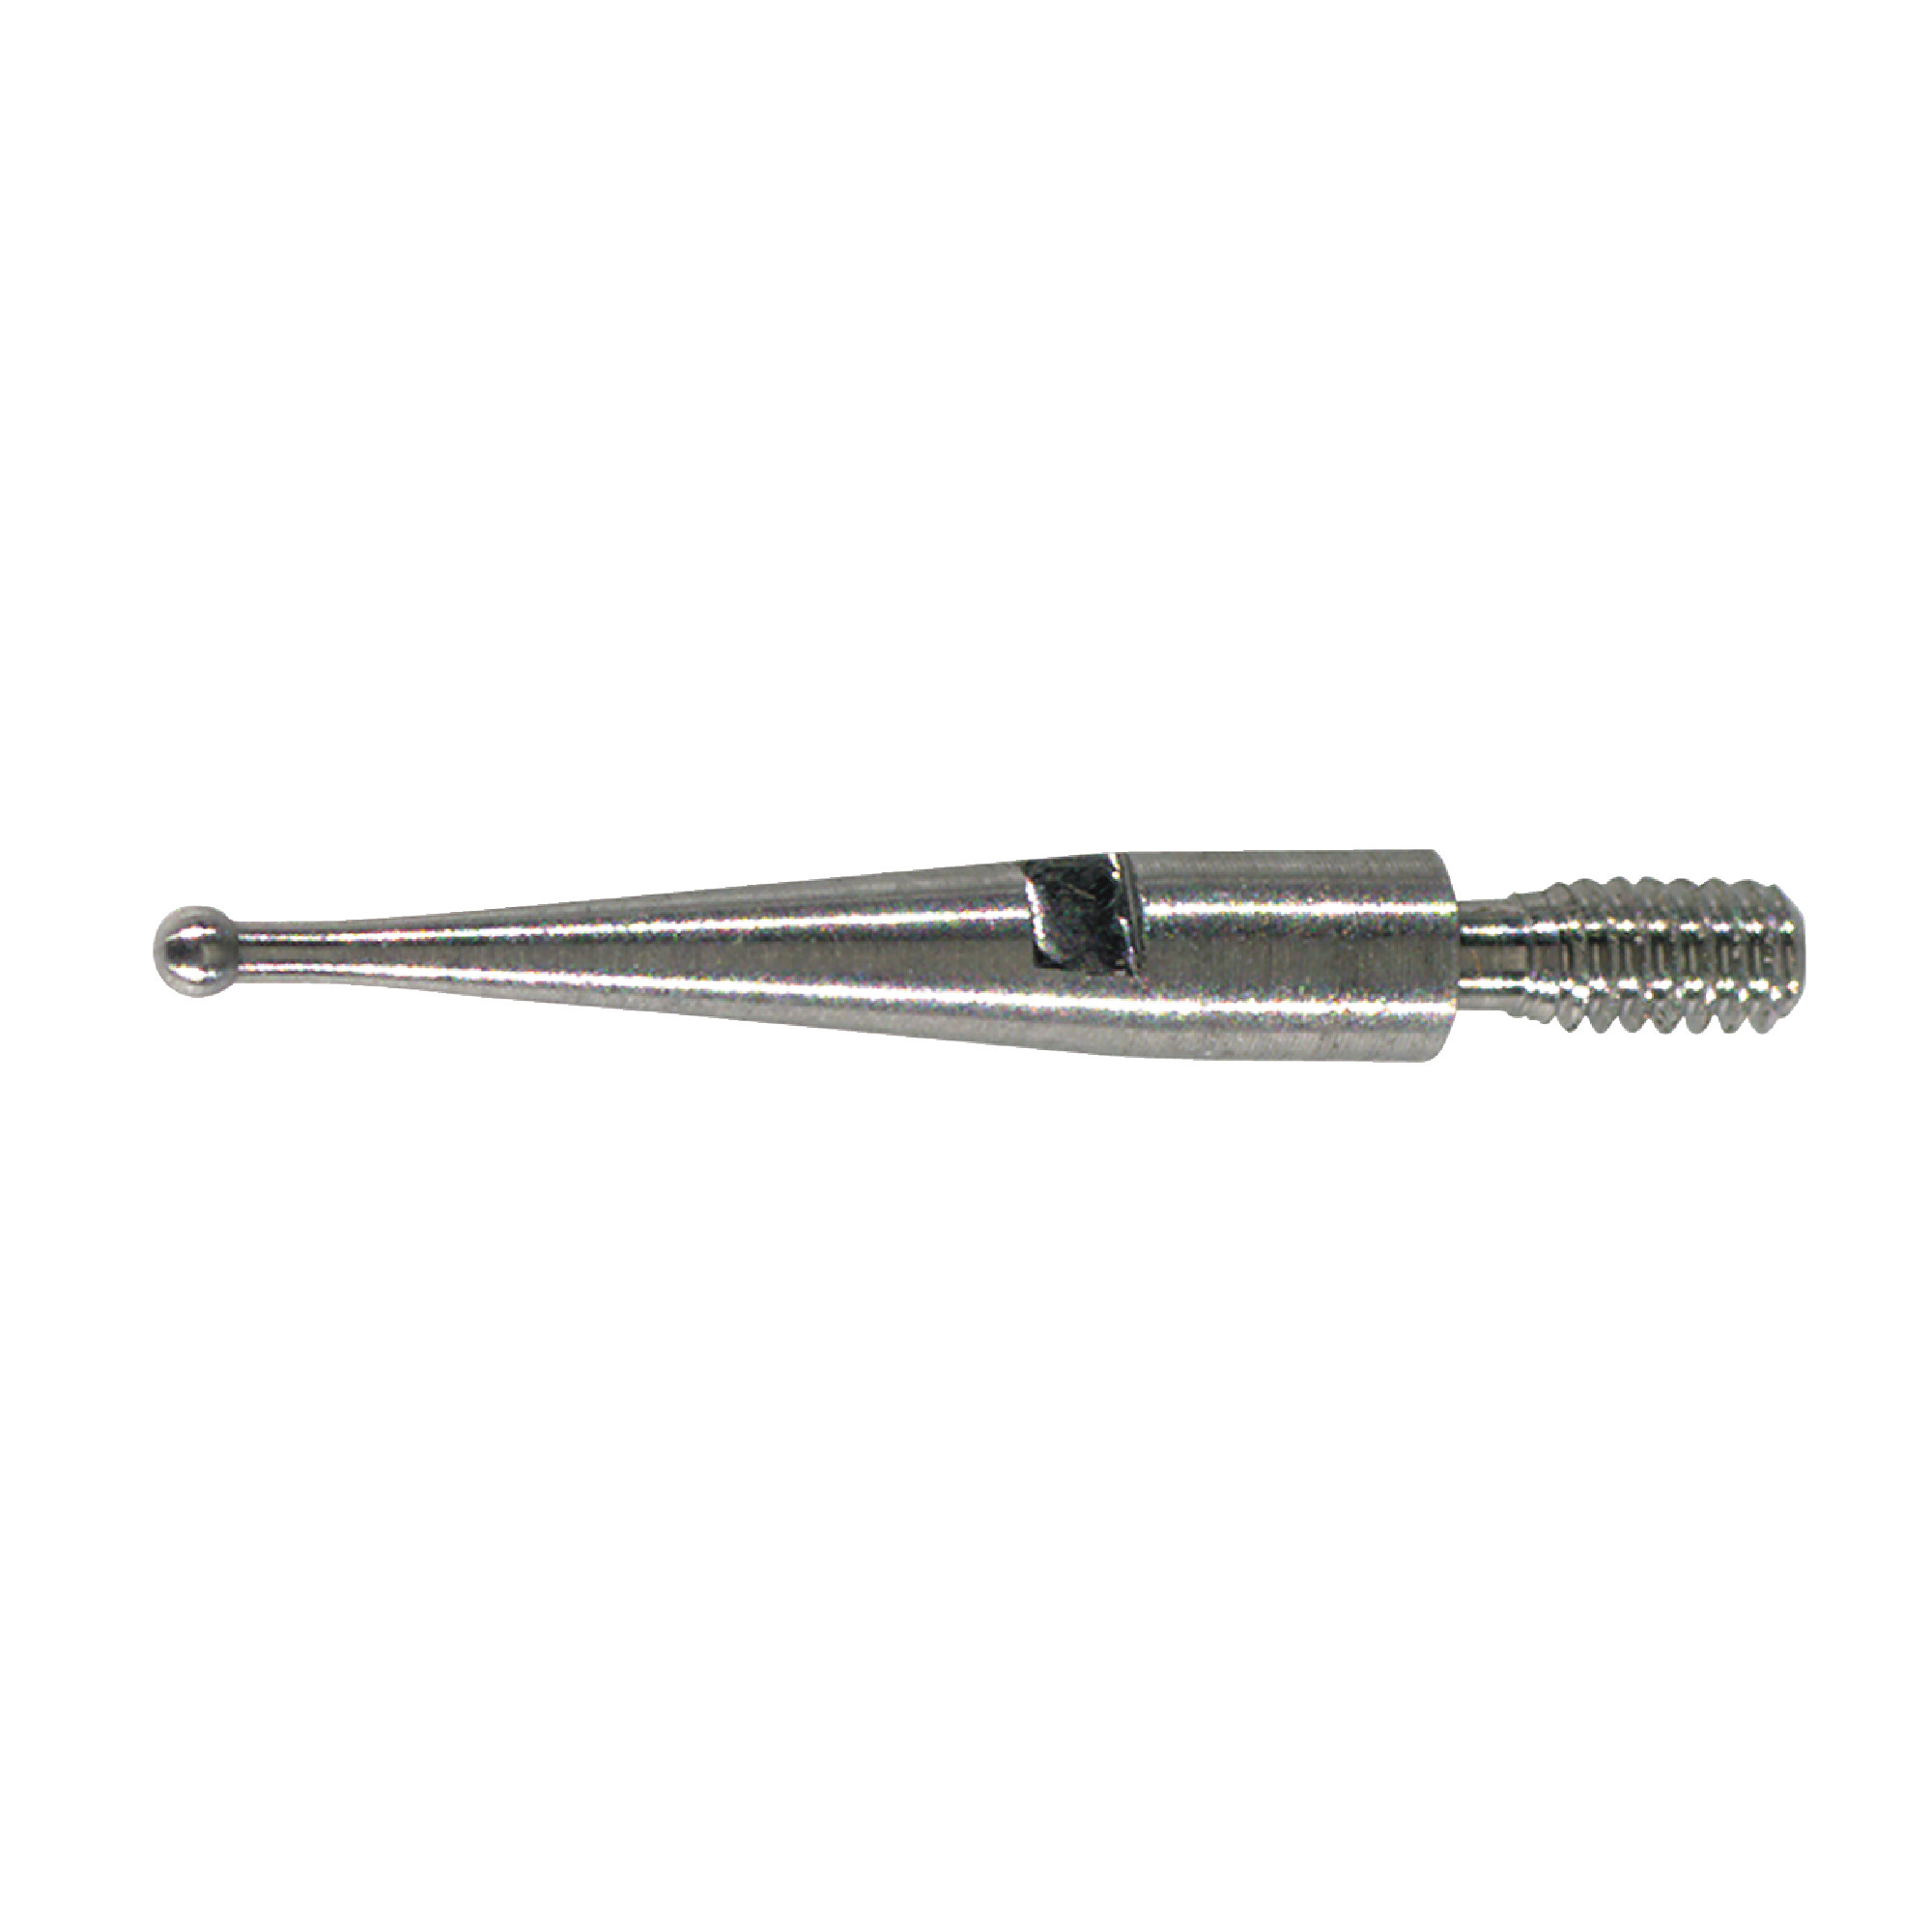 Carbide Contact Point for Dial Test Indicator